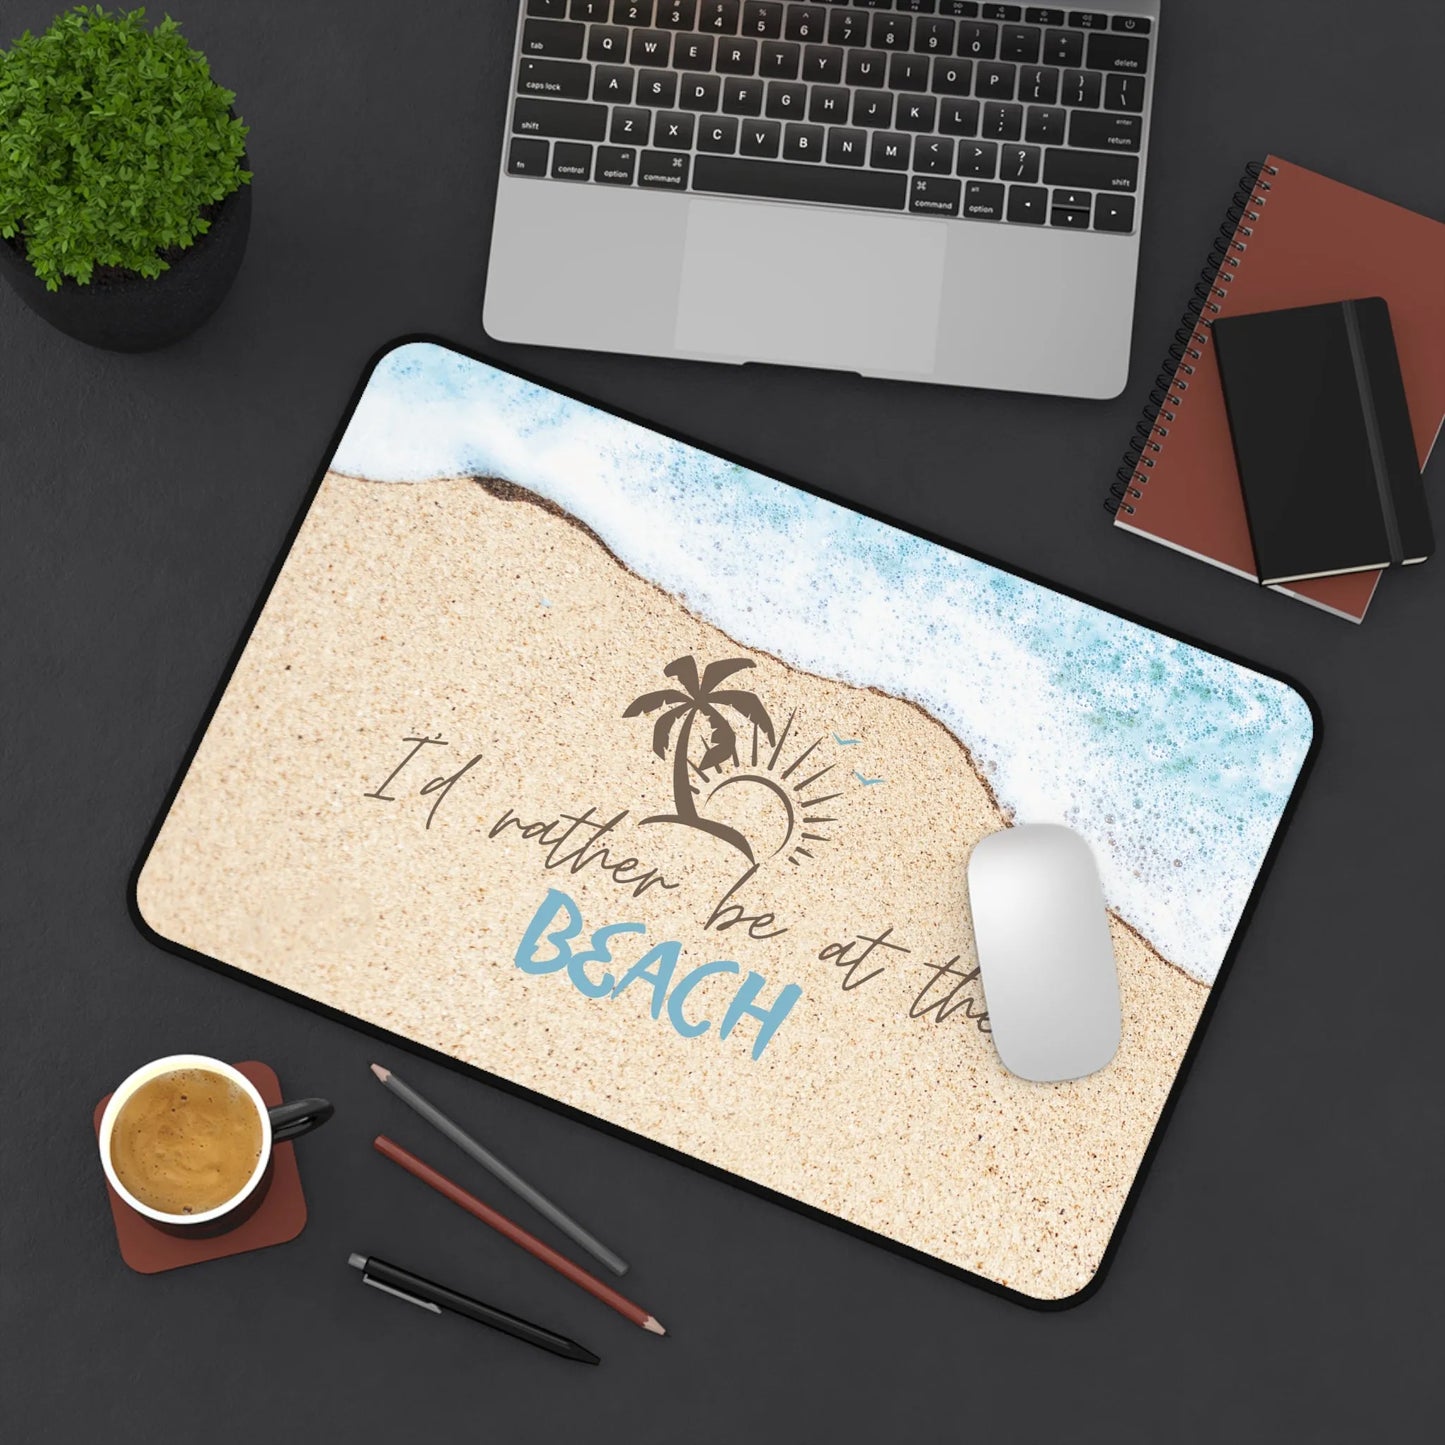 I'd Rather Be At The Beach Desk Mat - I'd Rather Be At The Beach Mouse Pad Small